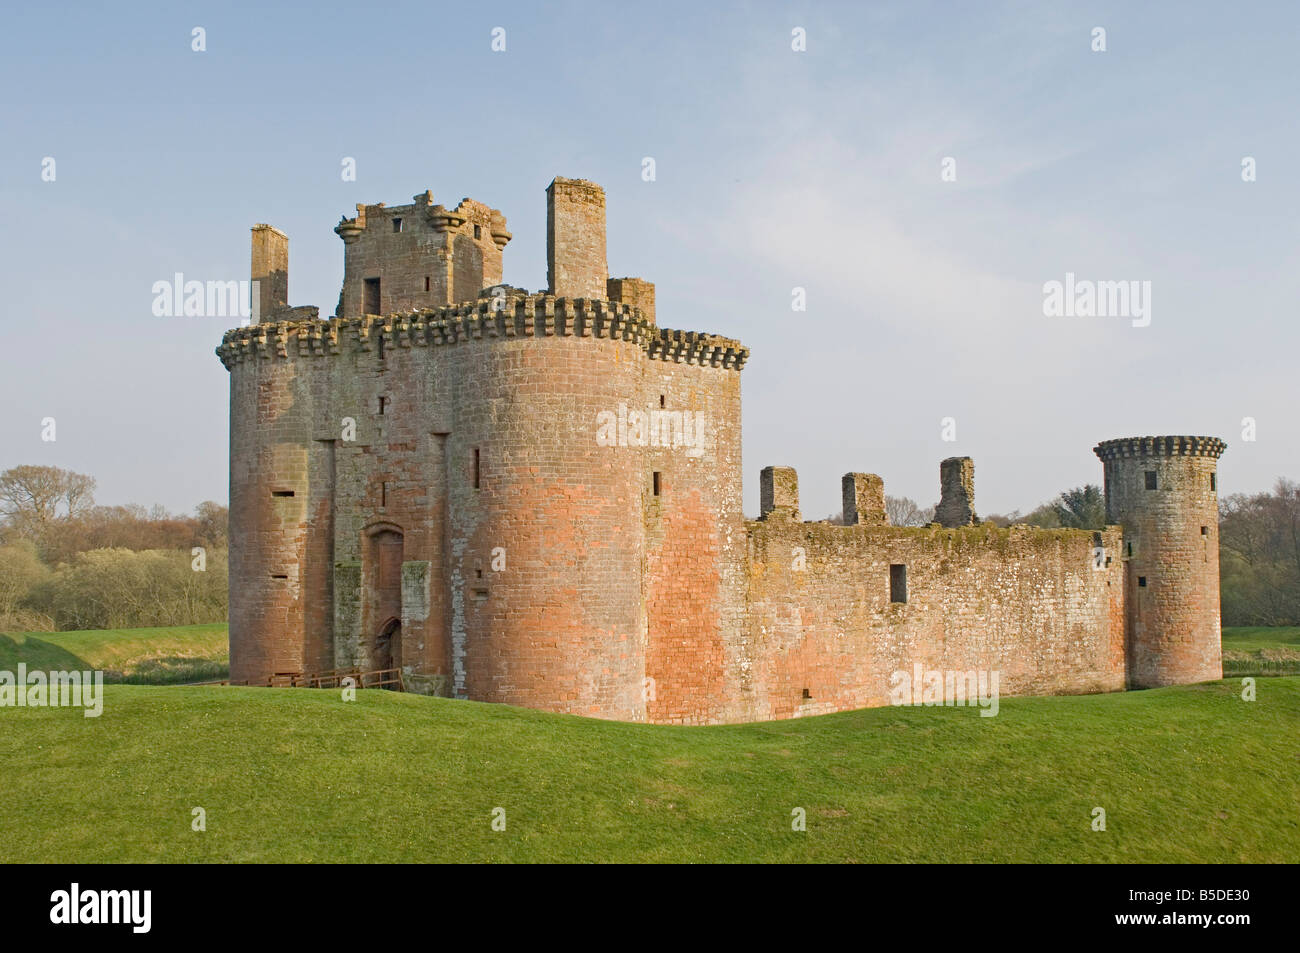 Moated medieval stronghold of Caerlaverock Castle, Dumfries and Galloway, Scotland, Europe Stock Photo